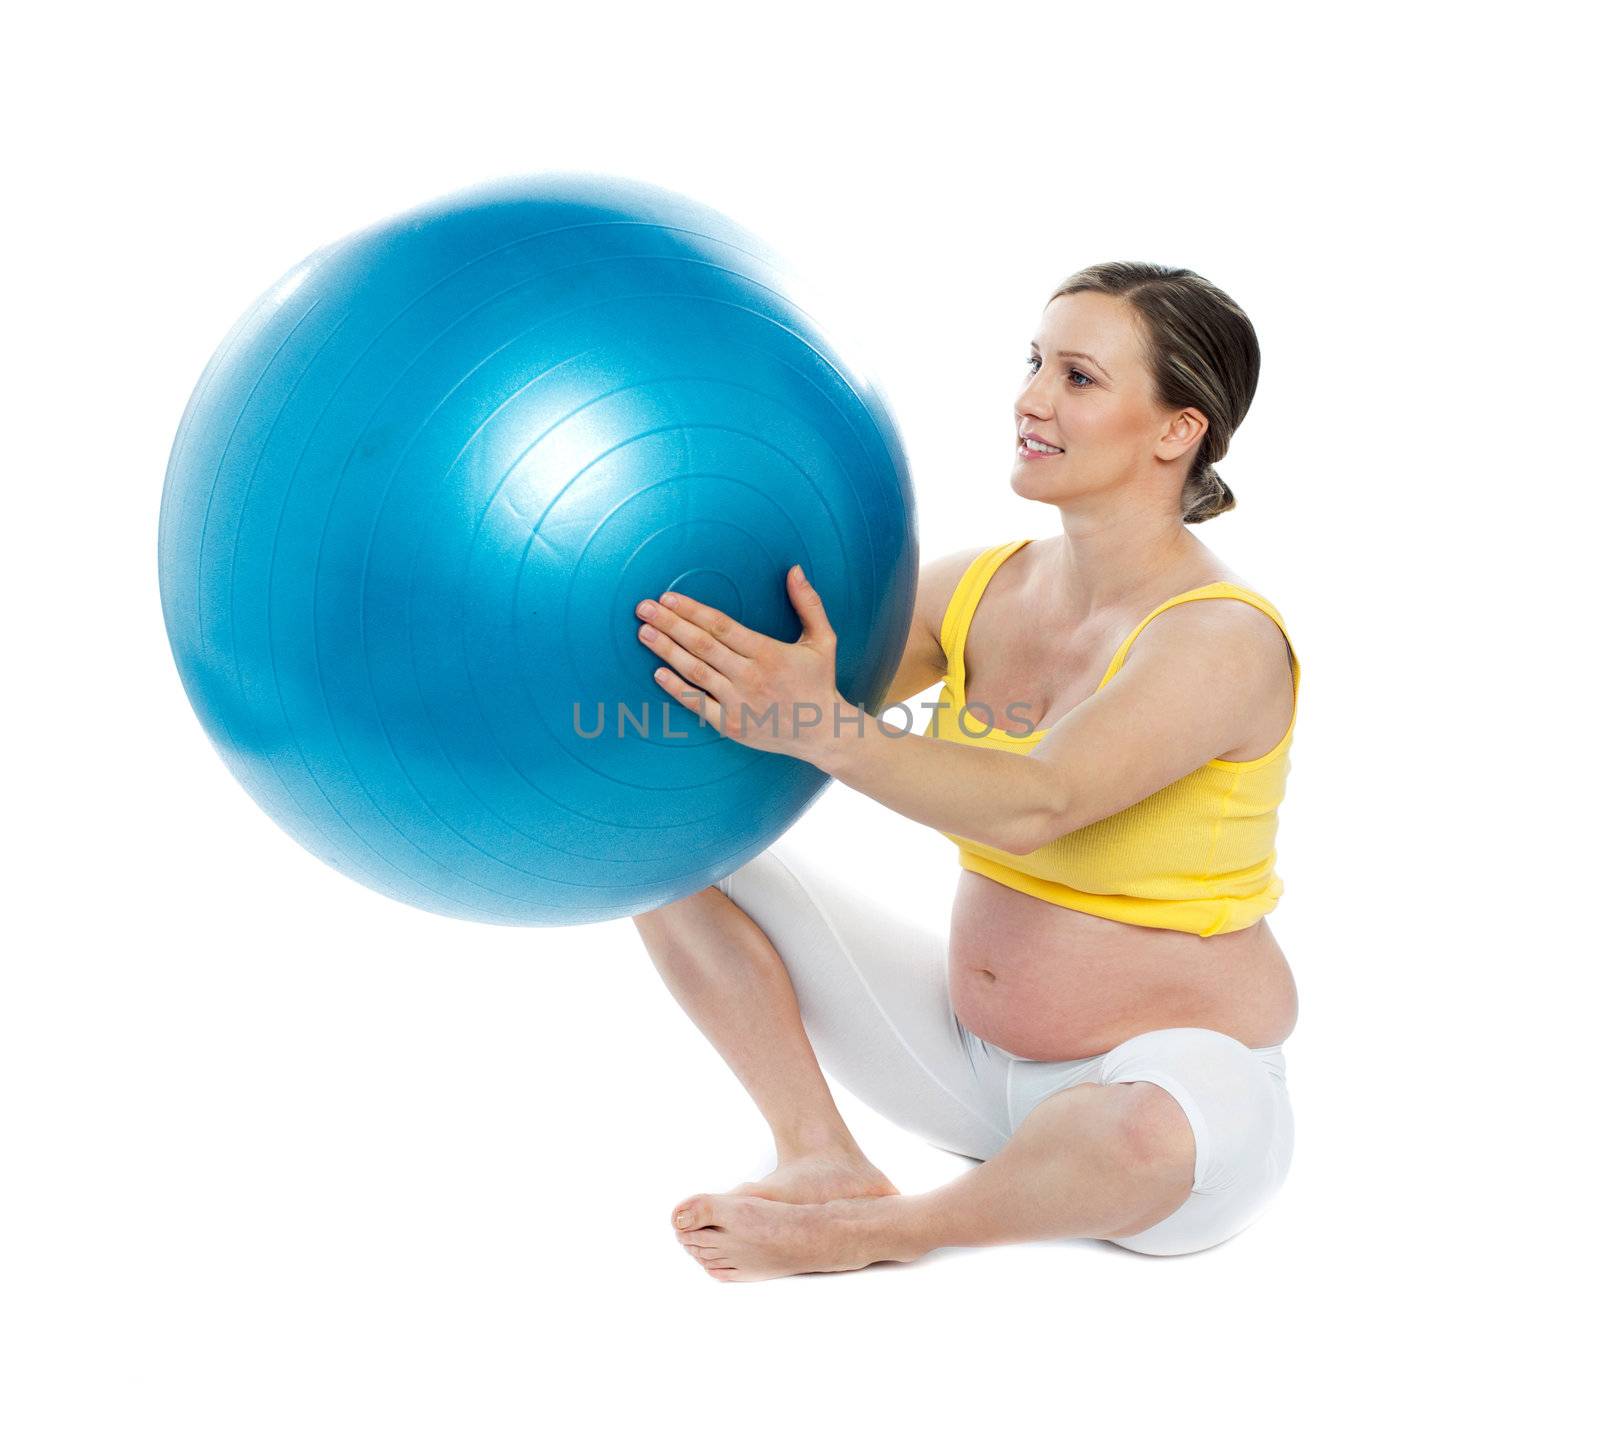 Pregnant woman excercises with a gymnastic ball by stockyimages